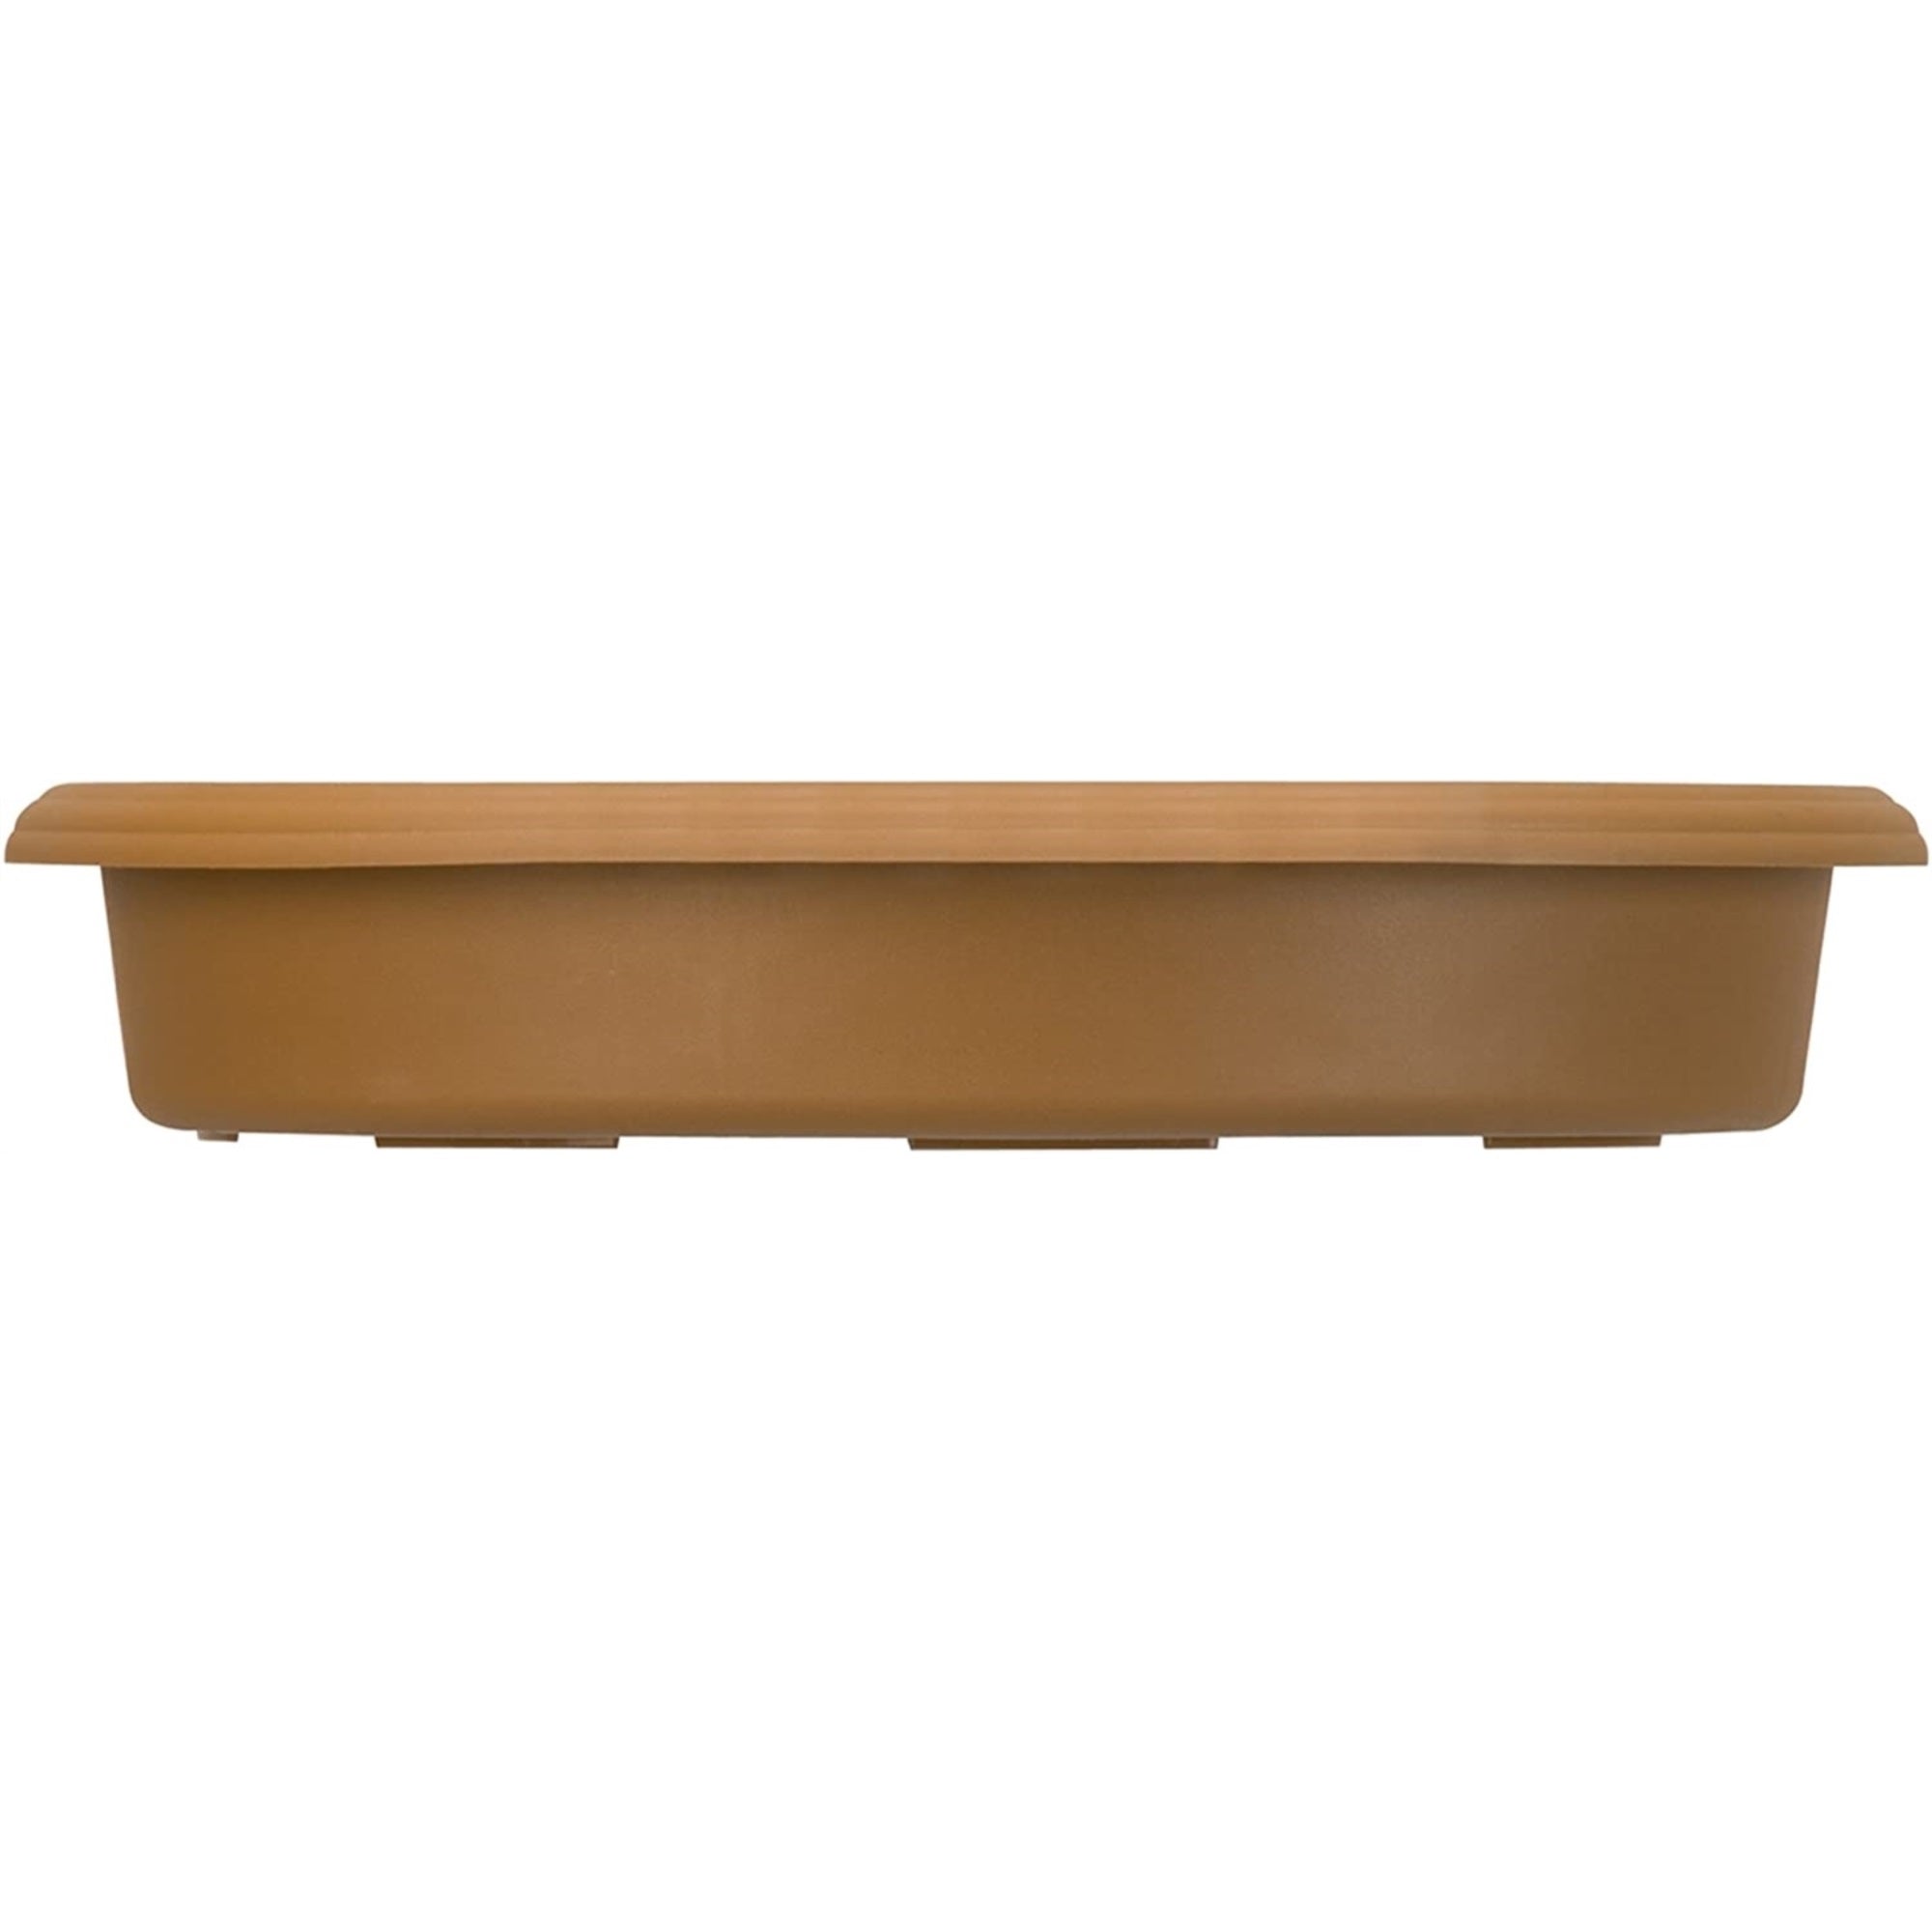 The HC Companies Panterra Plastic Saucer for 10 Inch Panterra Pot, Clay Color, 7.56 Inch